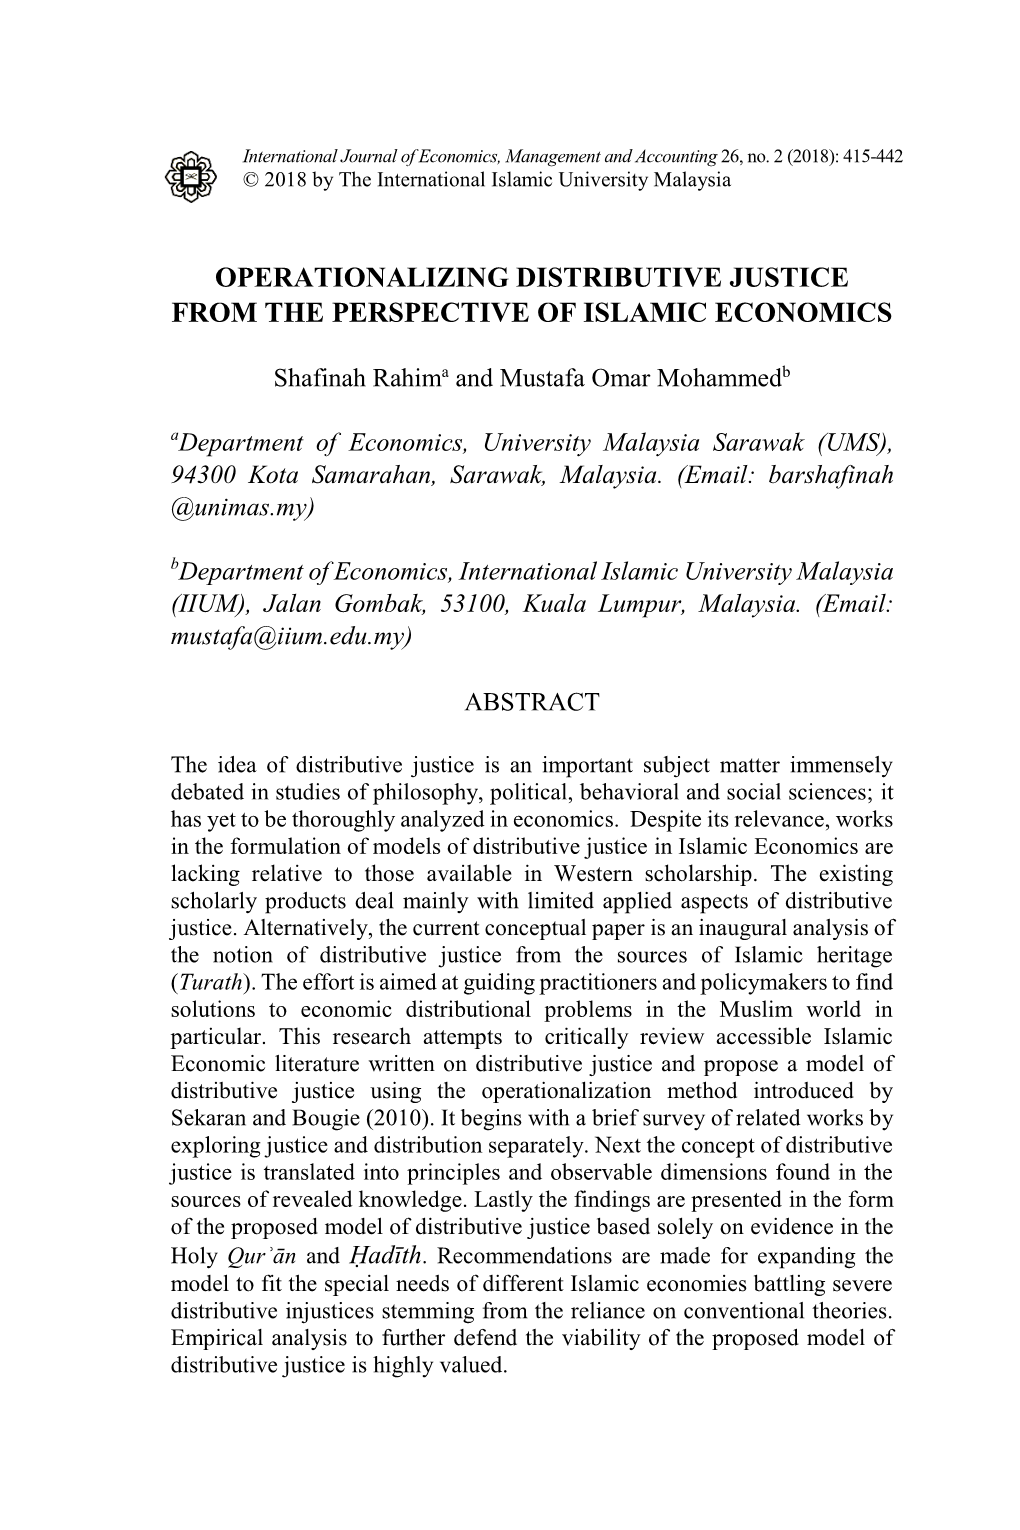 Operationalizing Distributive Justice from the Perspective of Islamic Economics